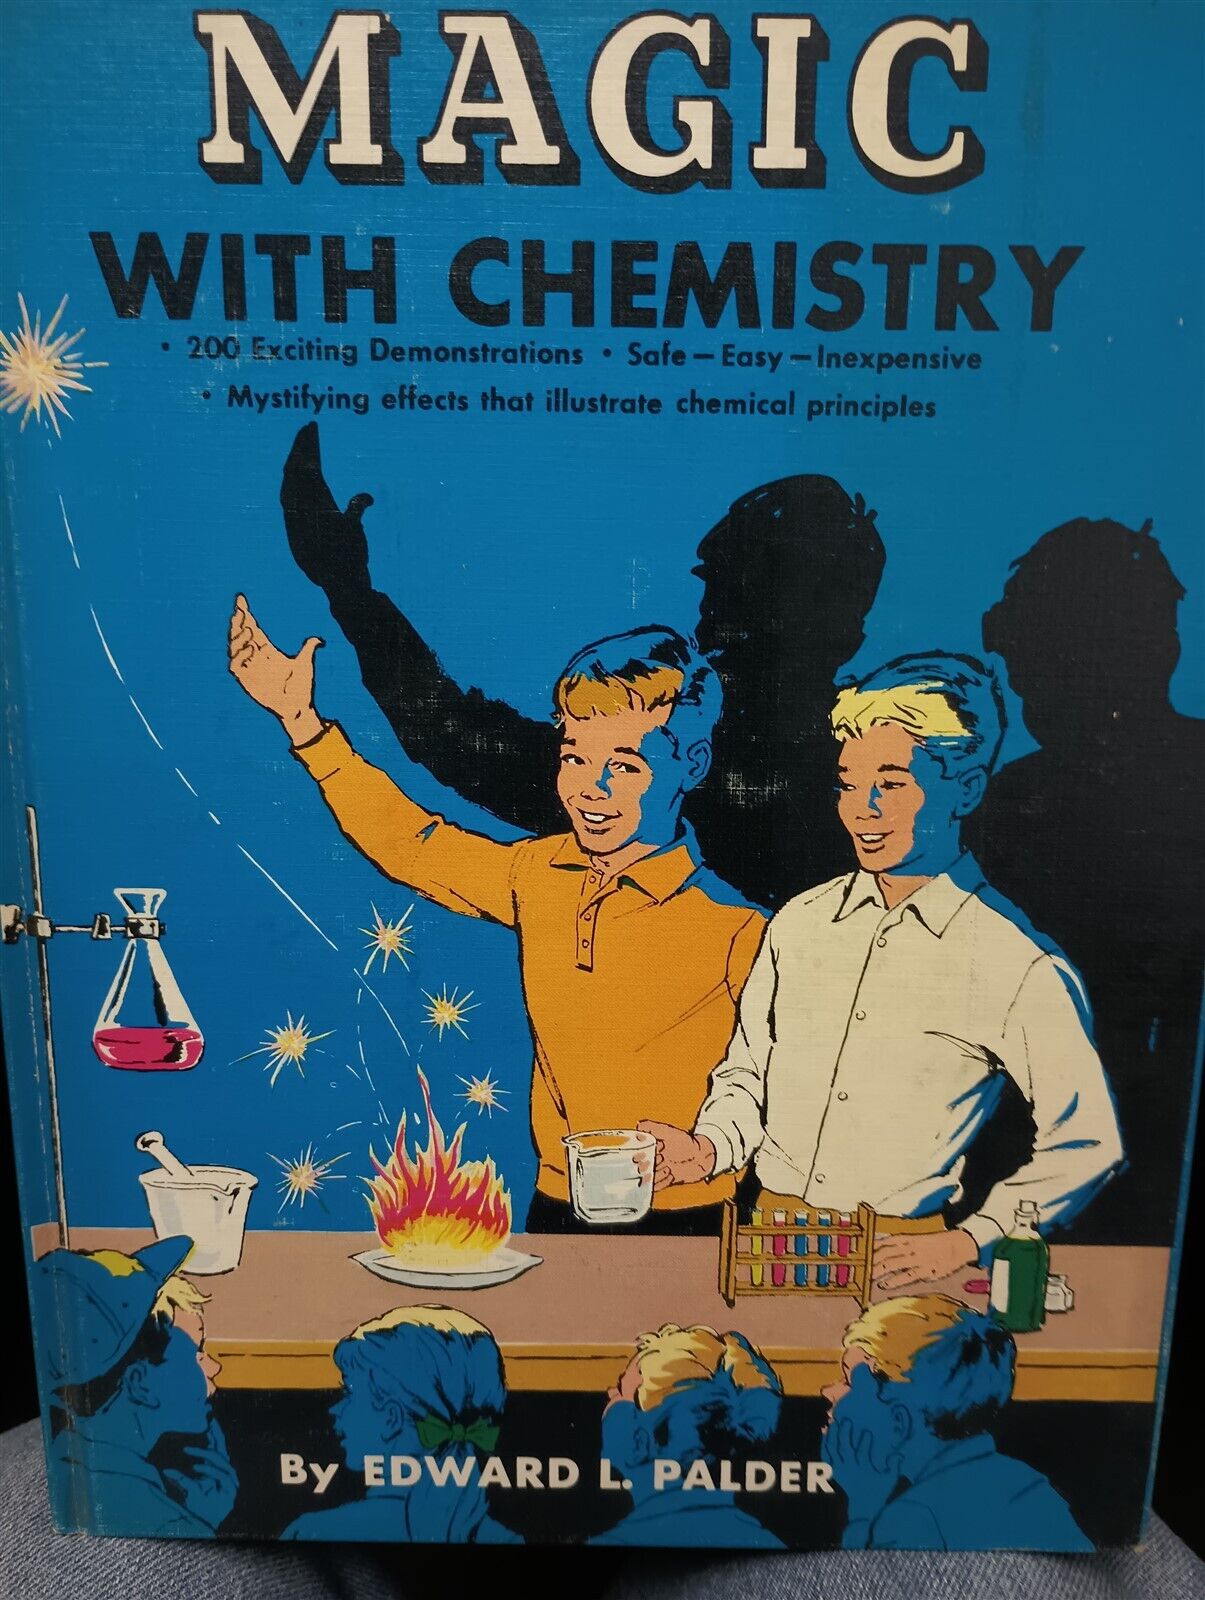 Magic with chemistry Mystery experiments demonstrations science clubs classes 